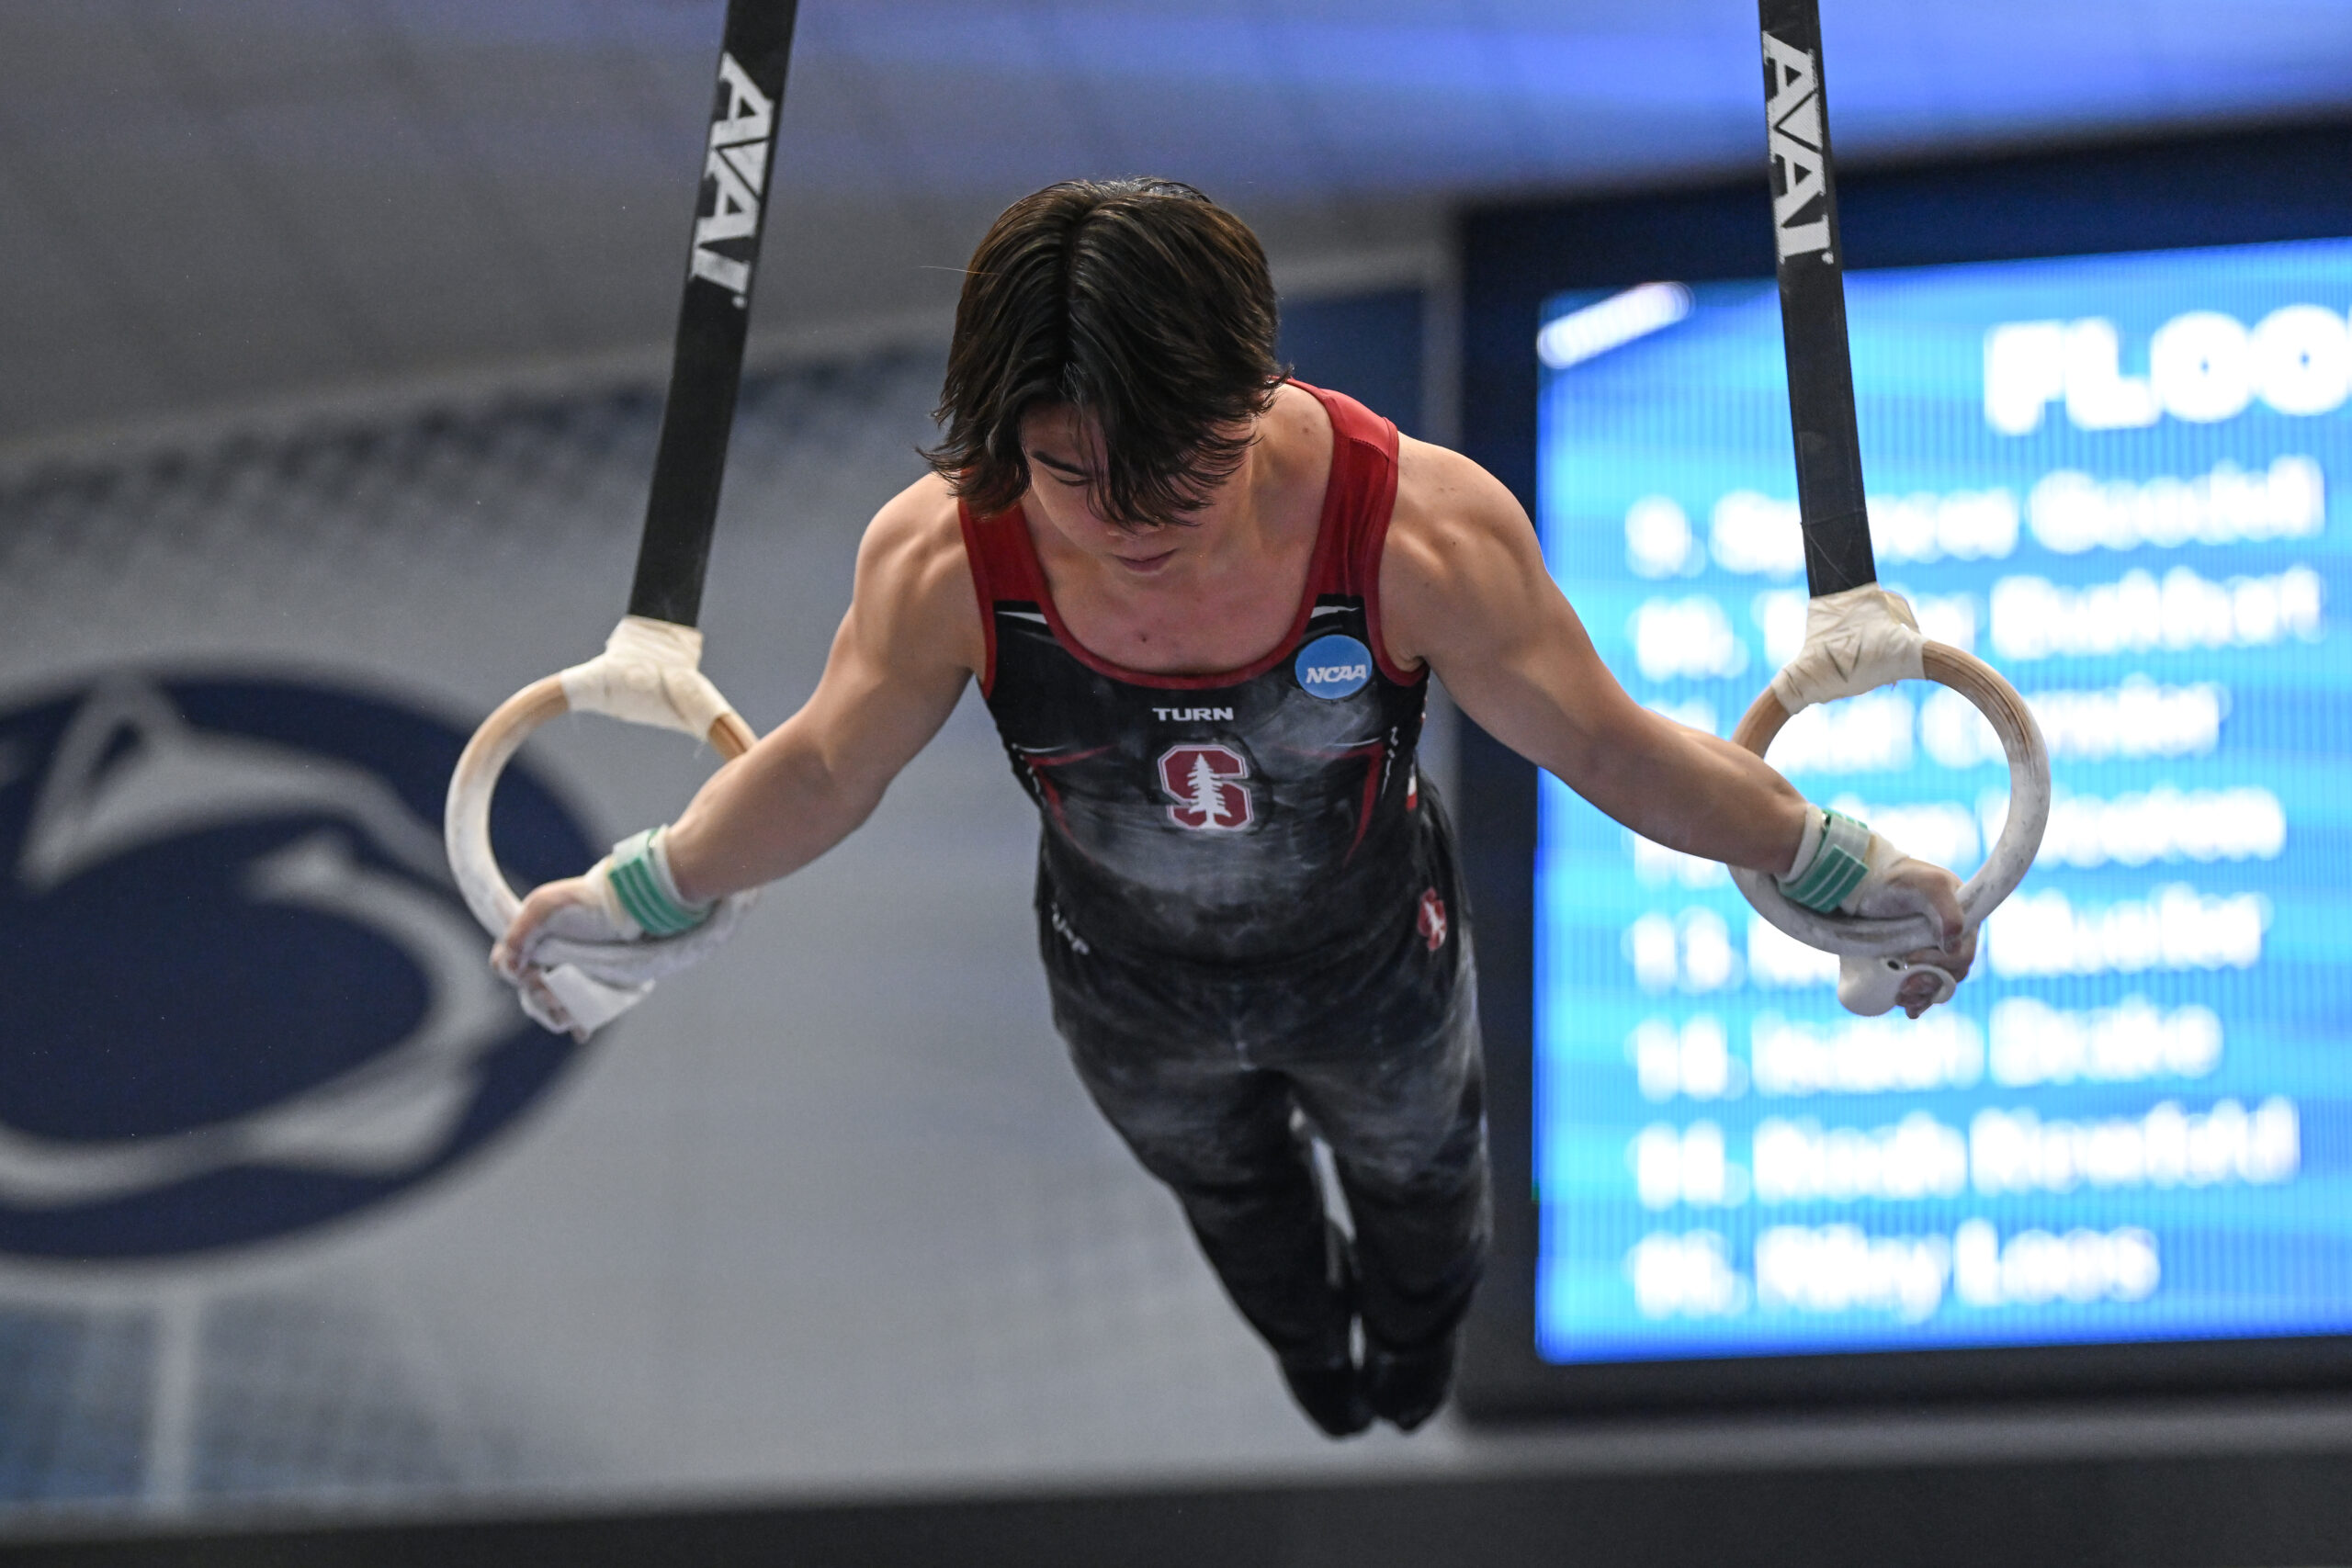 Stanford's Asher Hong on rings at the 2023 NCAA Men's Gymnastics Championships.